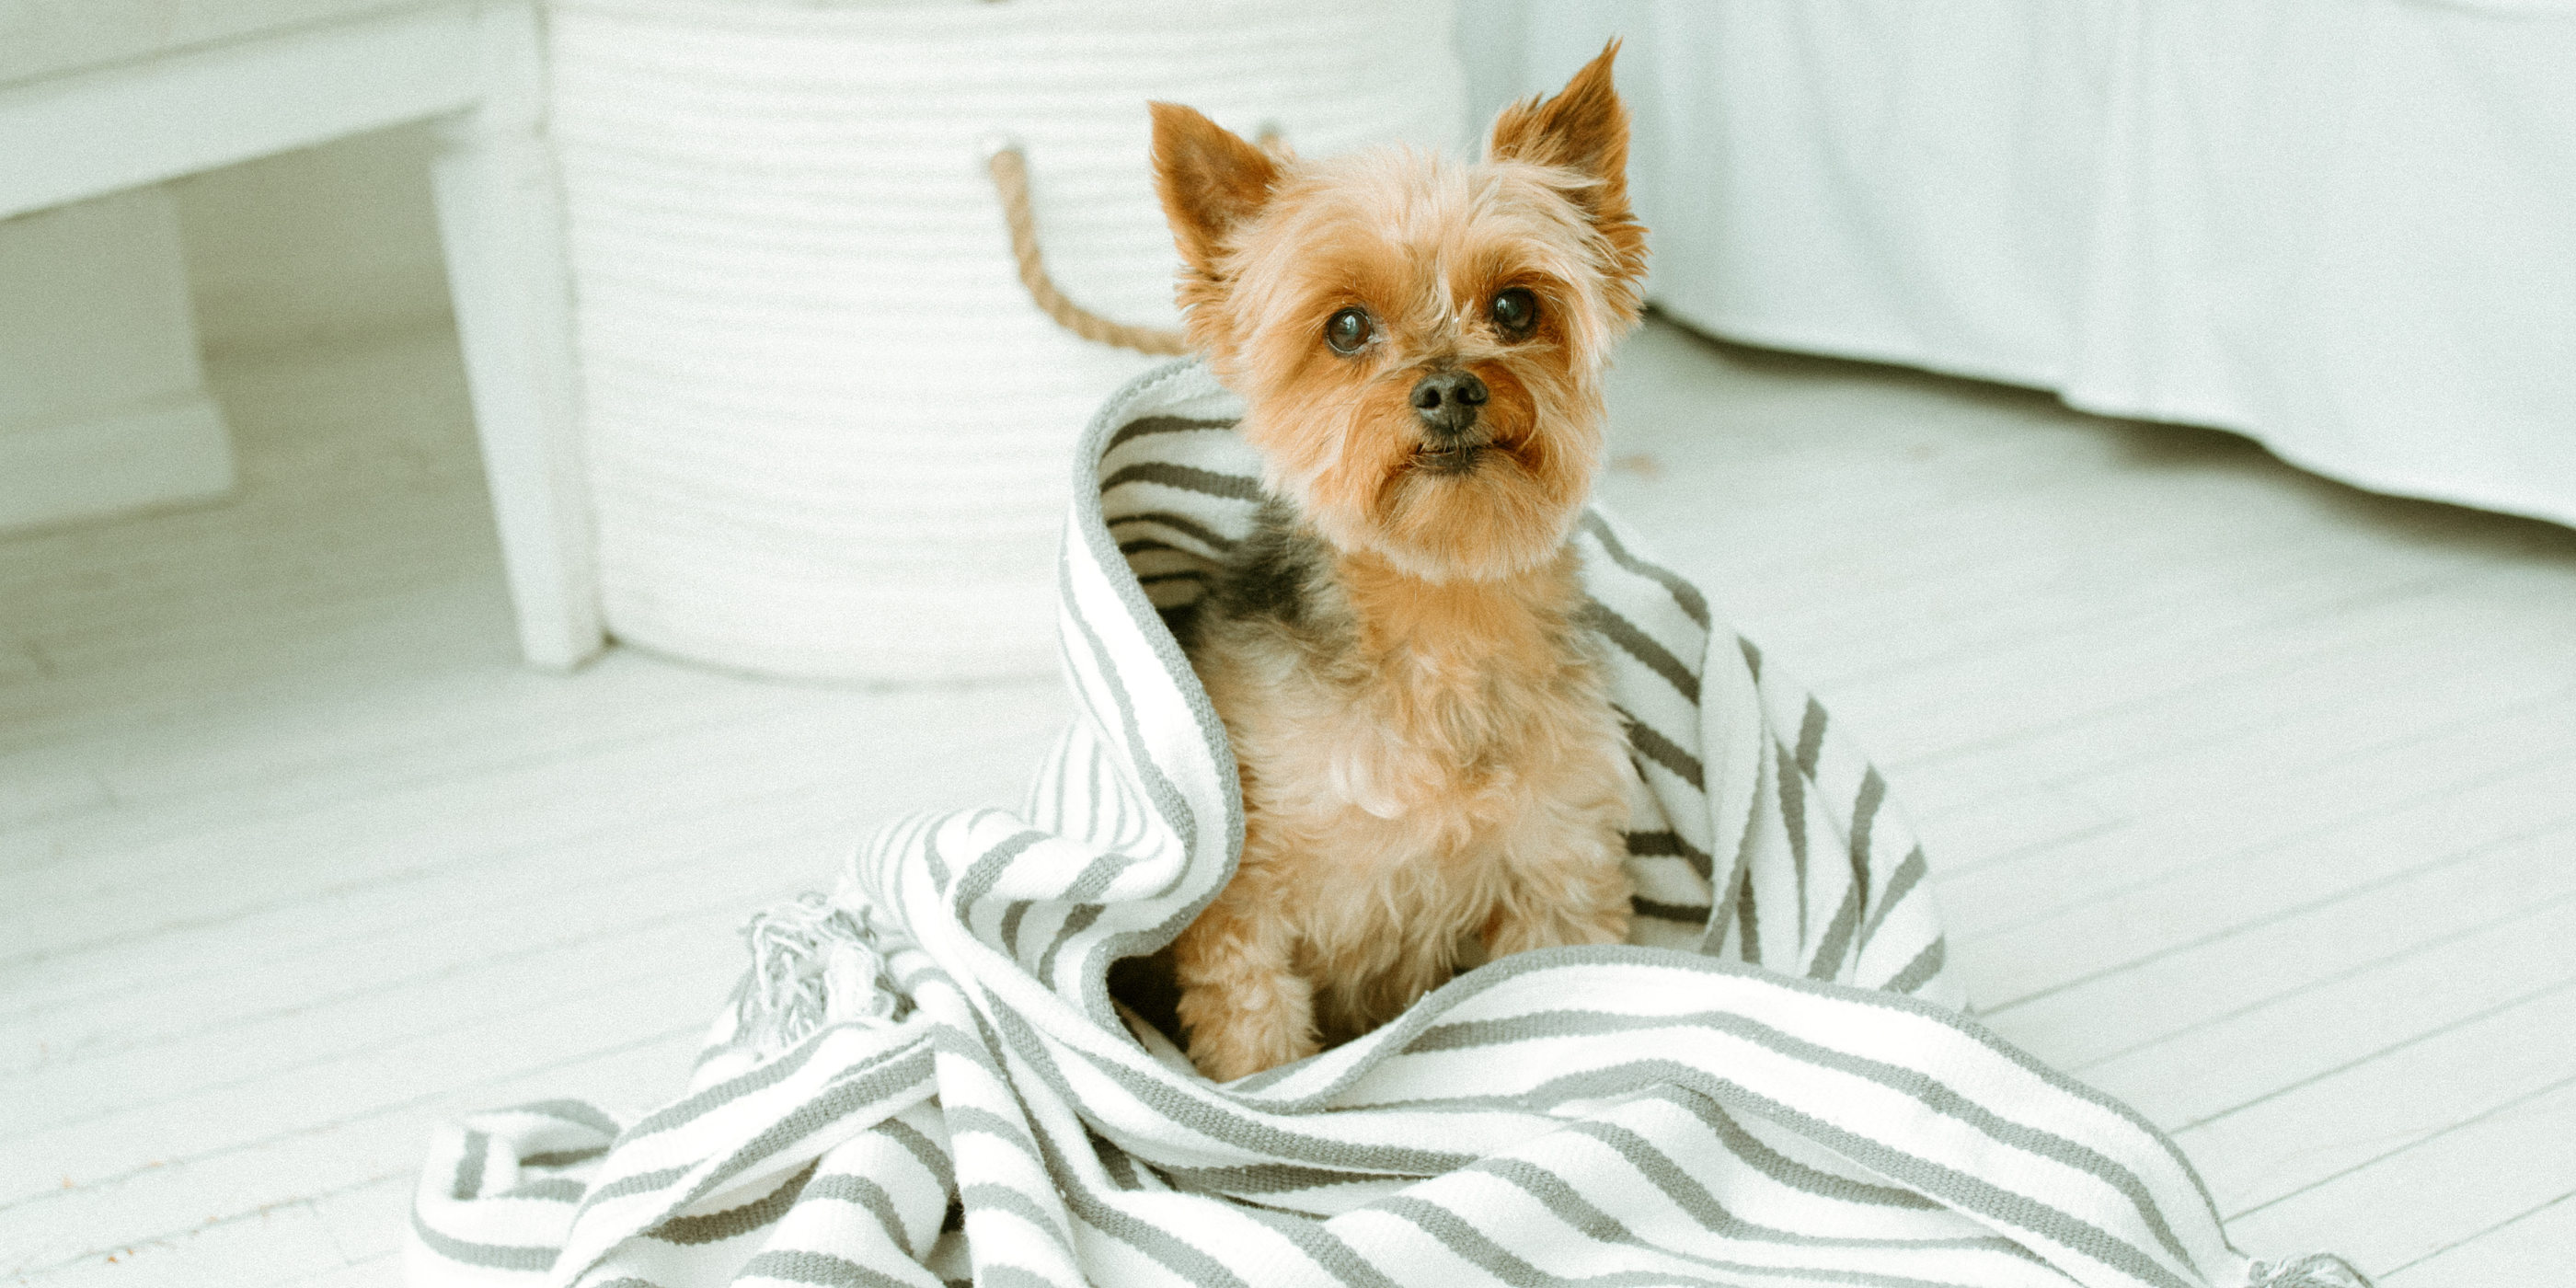 yorkie dog on bed in towel